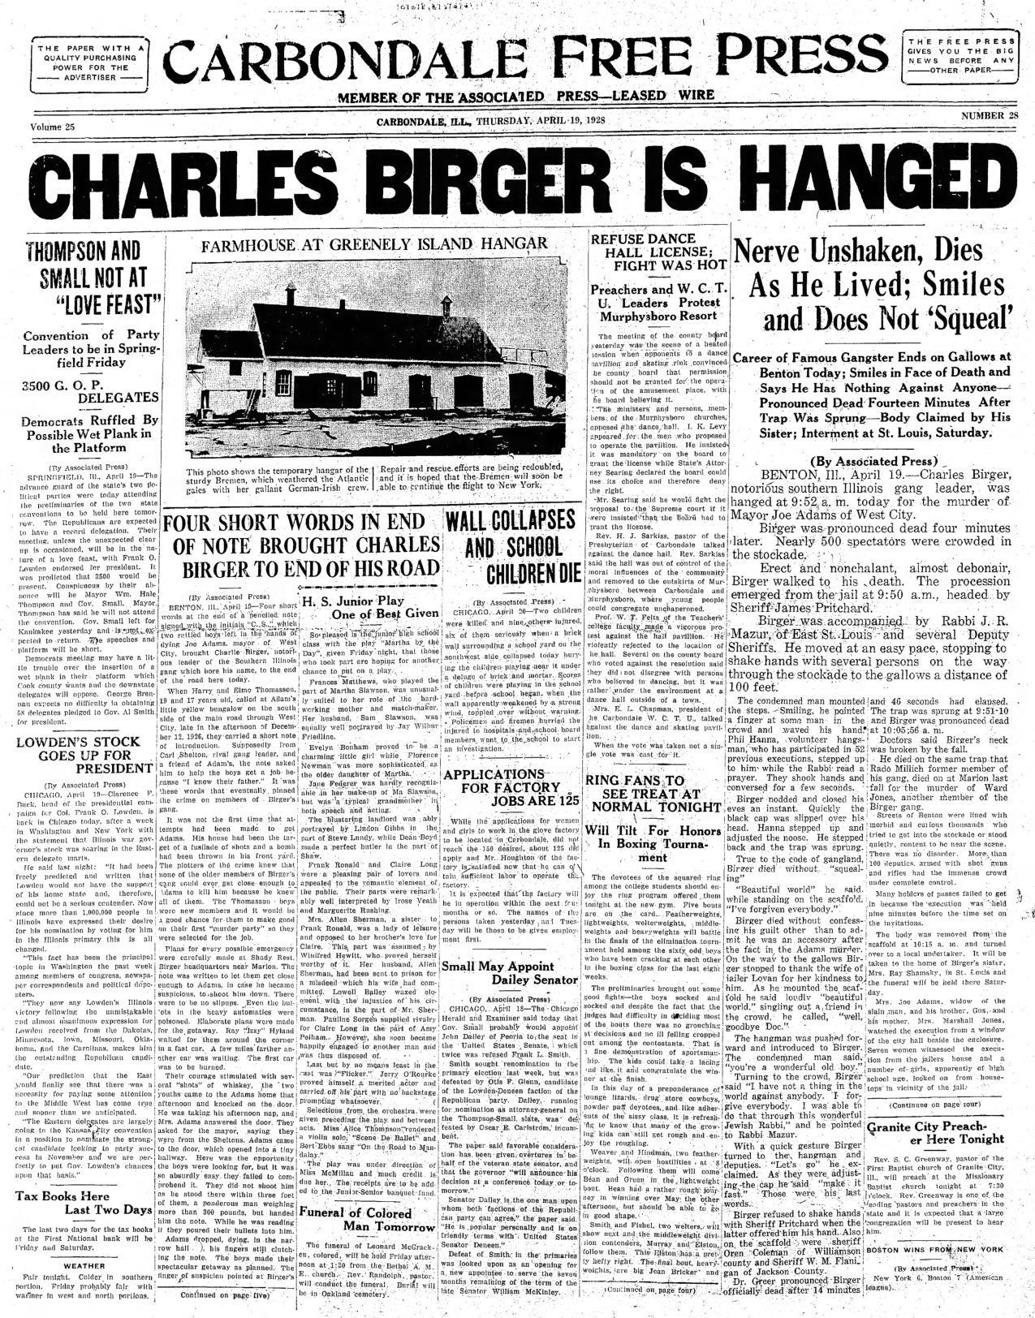 On April 19, 1928 in Benton, Charlie Birger was the last man publicly ...